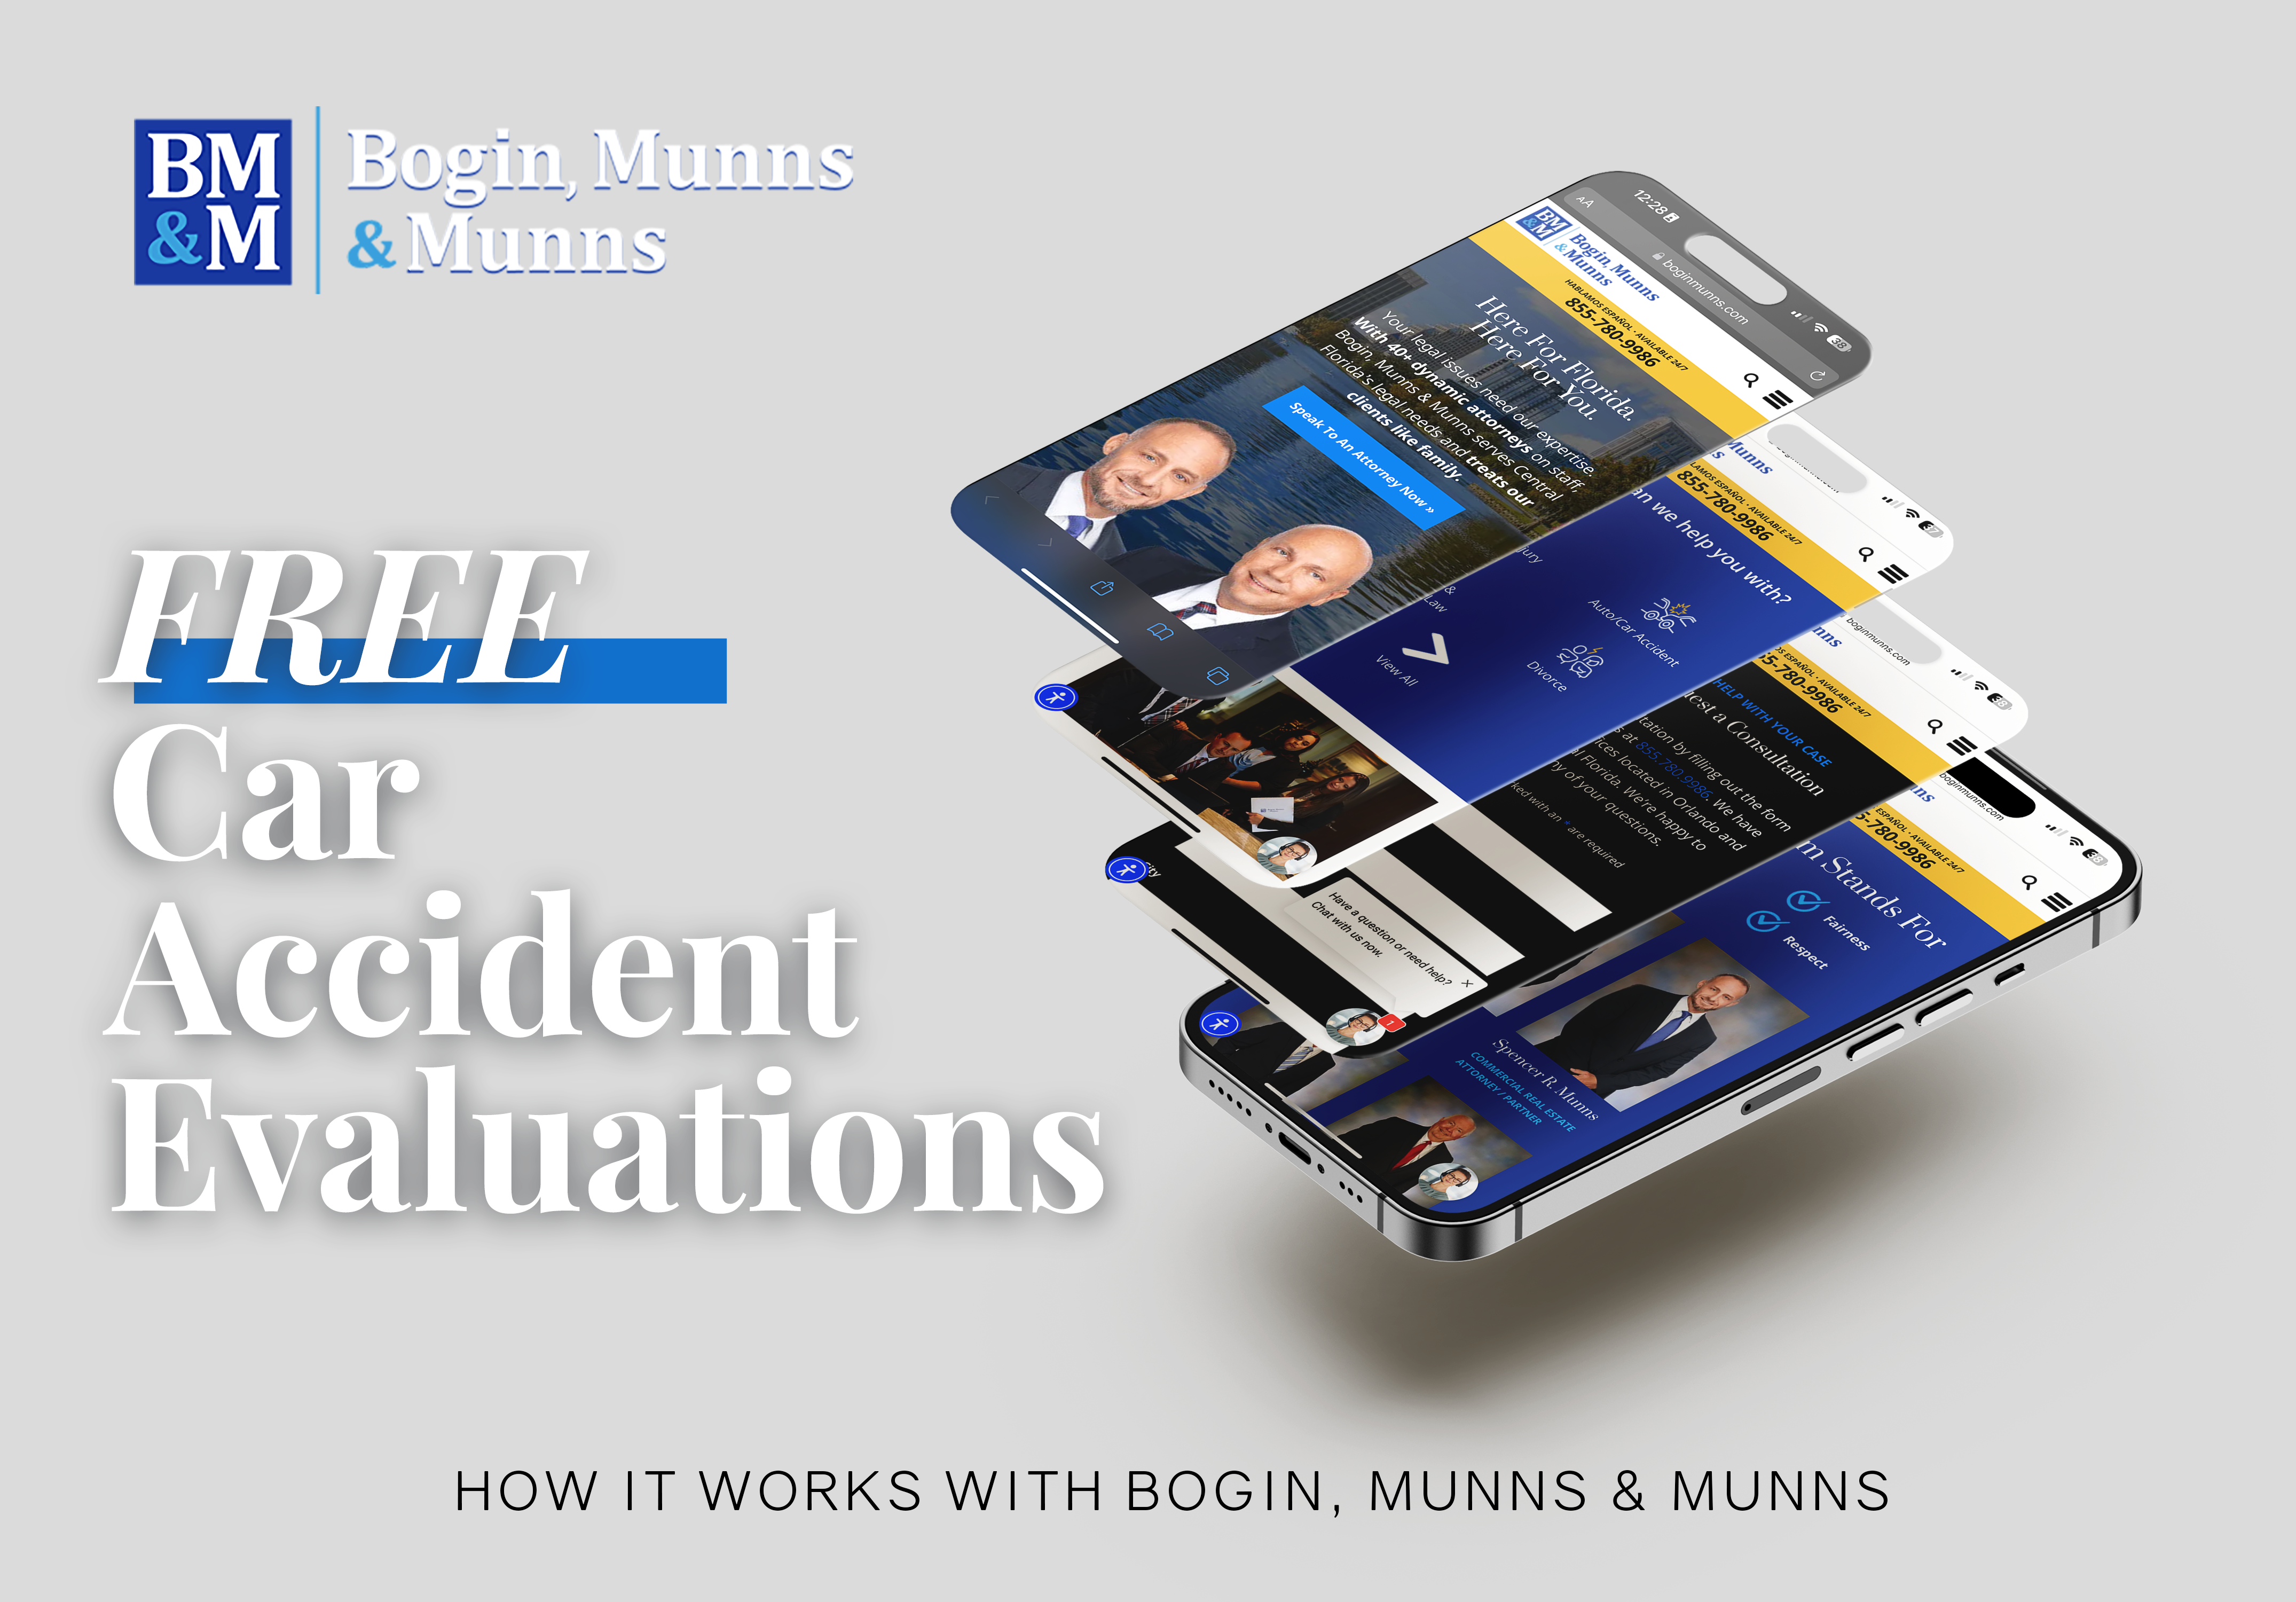 Free Car Accident Evaluation: How It Works with Bogin, Munns & Munns